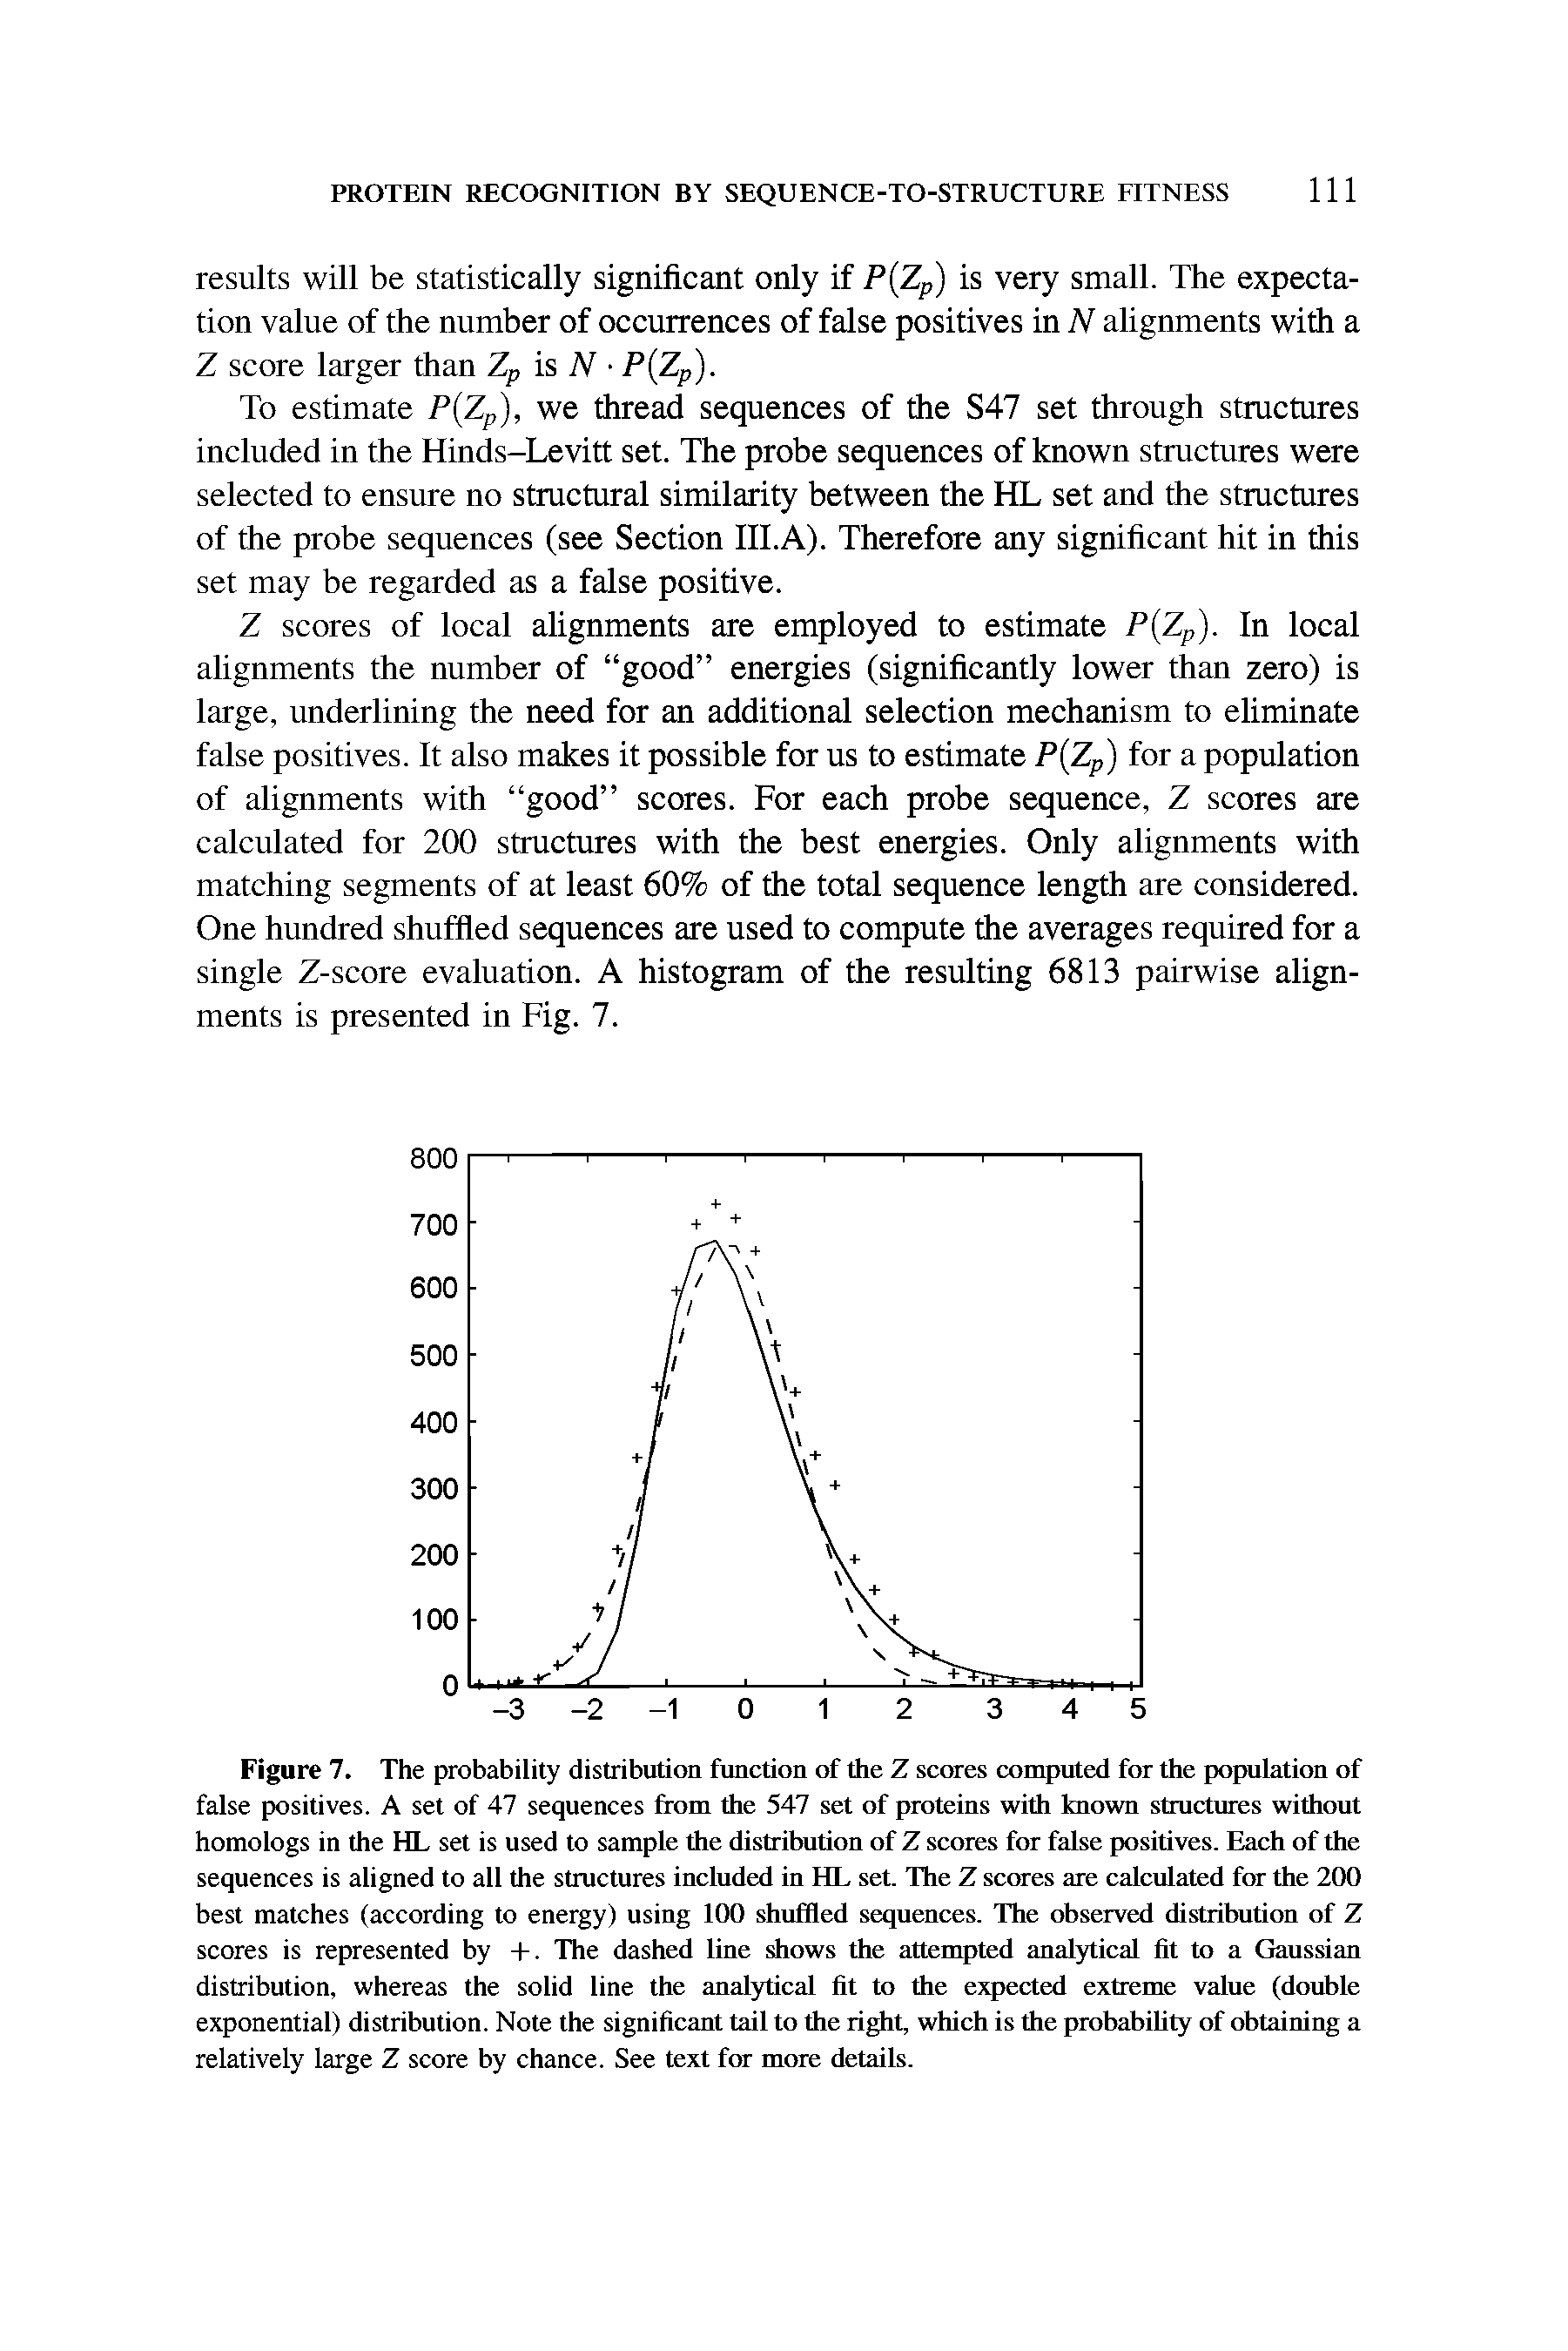 Figure 7. The probability distribution function of the Z sctn-es computed for the population of false positives. A set of 47 sequences from the 547 set of proteins with known structures without homologs in the HL set is used to sample the distribution of Z scores for false positives. Each of the sequences is aligned to all the structures included in HL set. Hie Z semes are calculated far the 200 best matches (according to energy) using 100 shuffled sequences. The observed distribution of Z scores is represented by +. The dashed line shows the attempted analytical fit to a Gaussian distribution, whereas the solid line the analytical fit to the expected extreme value (double exponential) distribution. Note the significant tail to the right, which is the probability of obtaining a relatively large Z score by chance. See text far mote details.